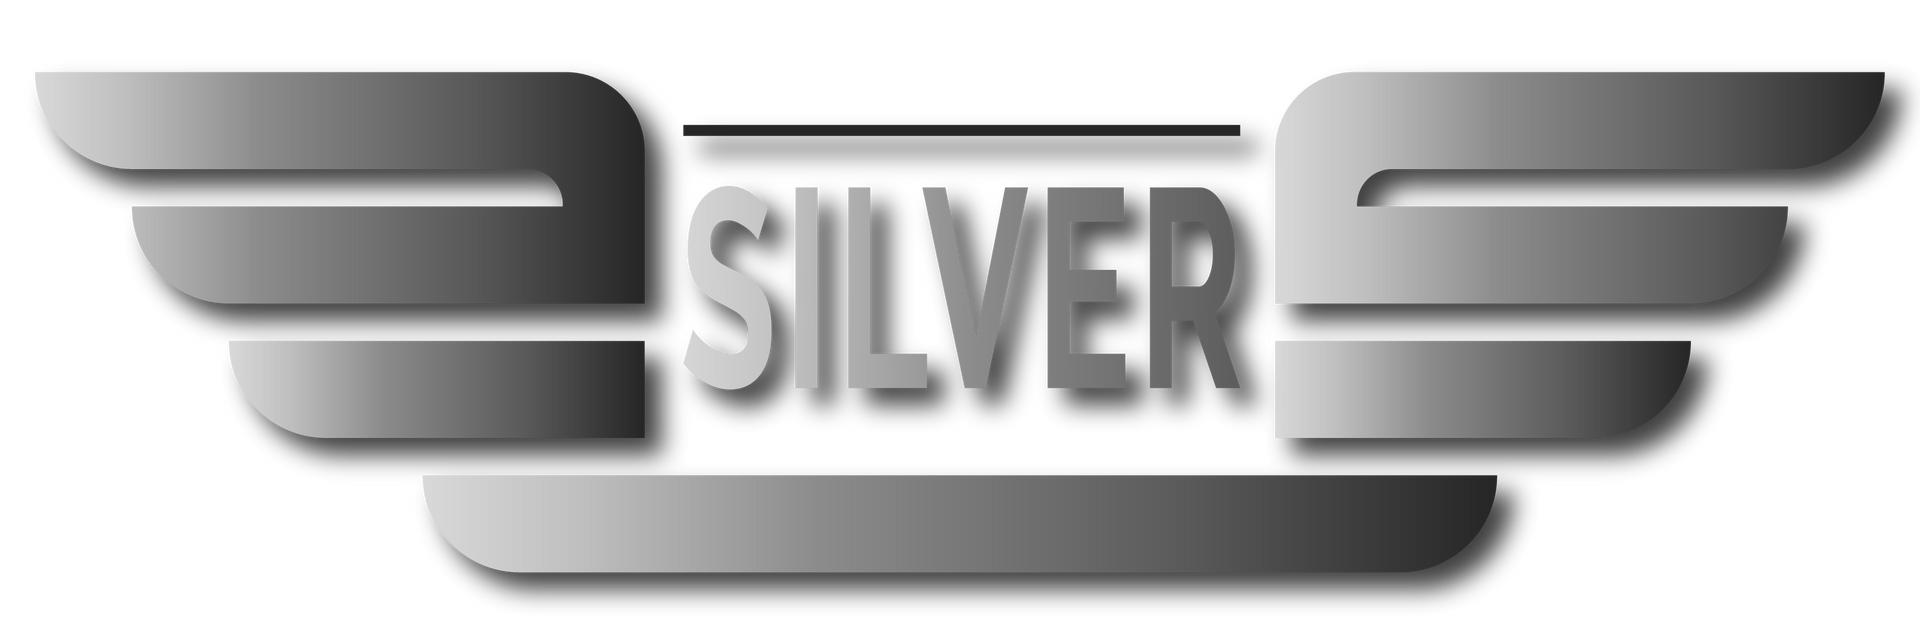 a silver logo with wings and the word silver on it